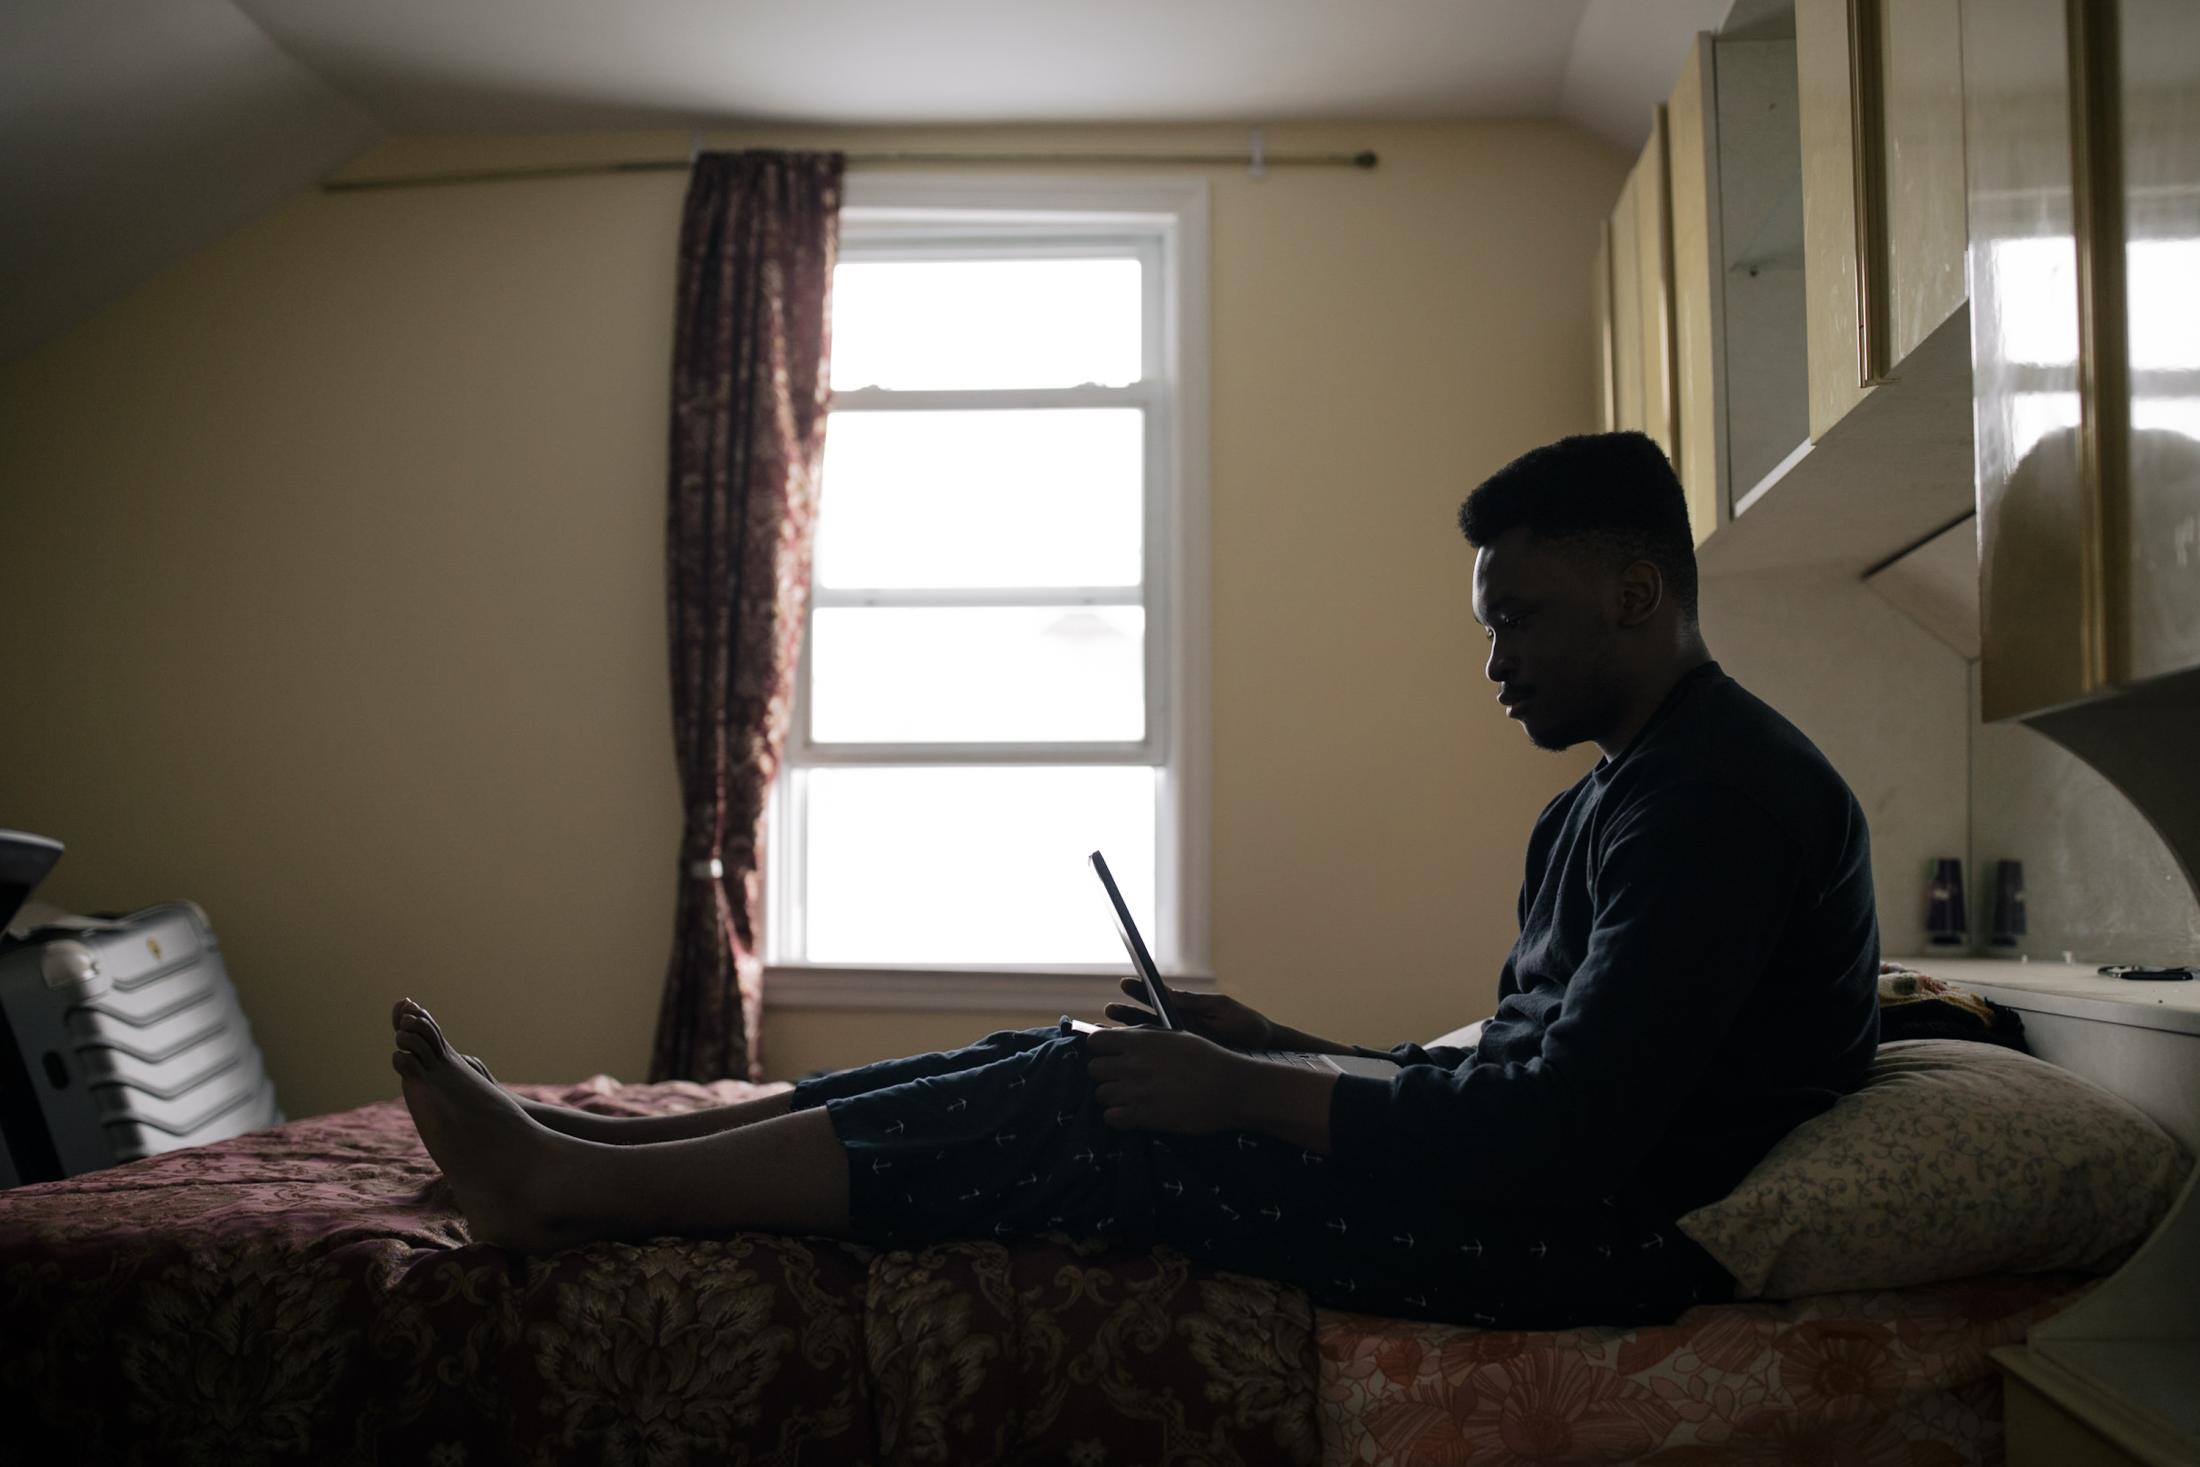 New York City, New York &mdash; February 11, 2021: Christian Nwenyi, 18, Senior at Stuyvesant High School and Director of Tutoring for EduCove, at his home during a virtual meeting with Co-Founder of the free tutoring service, Ian Lau, and EduCove team members Joyce Lin and Subyeta Chowdhury, in early February where the group explored ways to pass down the service to underclassmen. As the pandemic continues to impact the lives of students reliant on the city&rsquo;s public schools for education, a group of Stuyvesant High School students launched EduCove, a free tutoring service connecting teens from the city high schools with students in kindergarten through eighth grade, to help aid New York City&rsquo;s most vulnerable students struggling in their studies. CREDIT: Jos&eacute; A. Alvarado Jr. for The Wall Street Journal